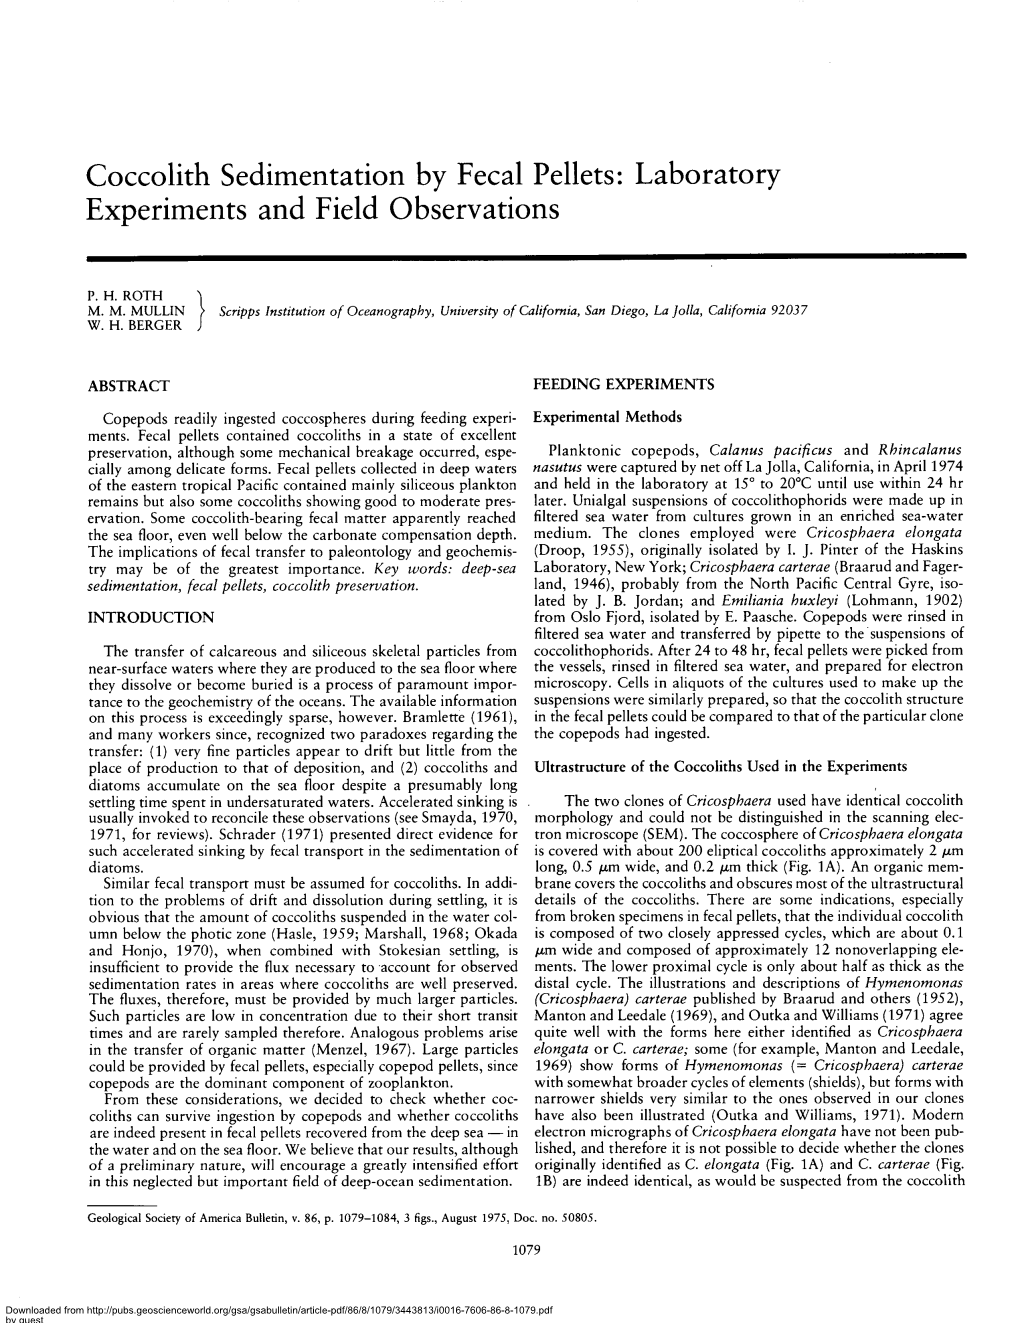 Coccolith Sedimentation by Fecal Pellets: Laboratory Experiments and Field Observations